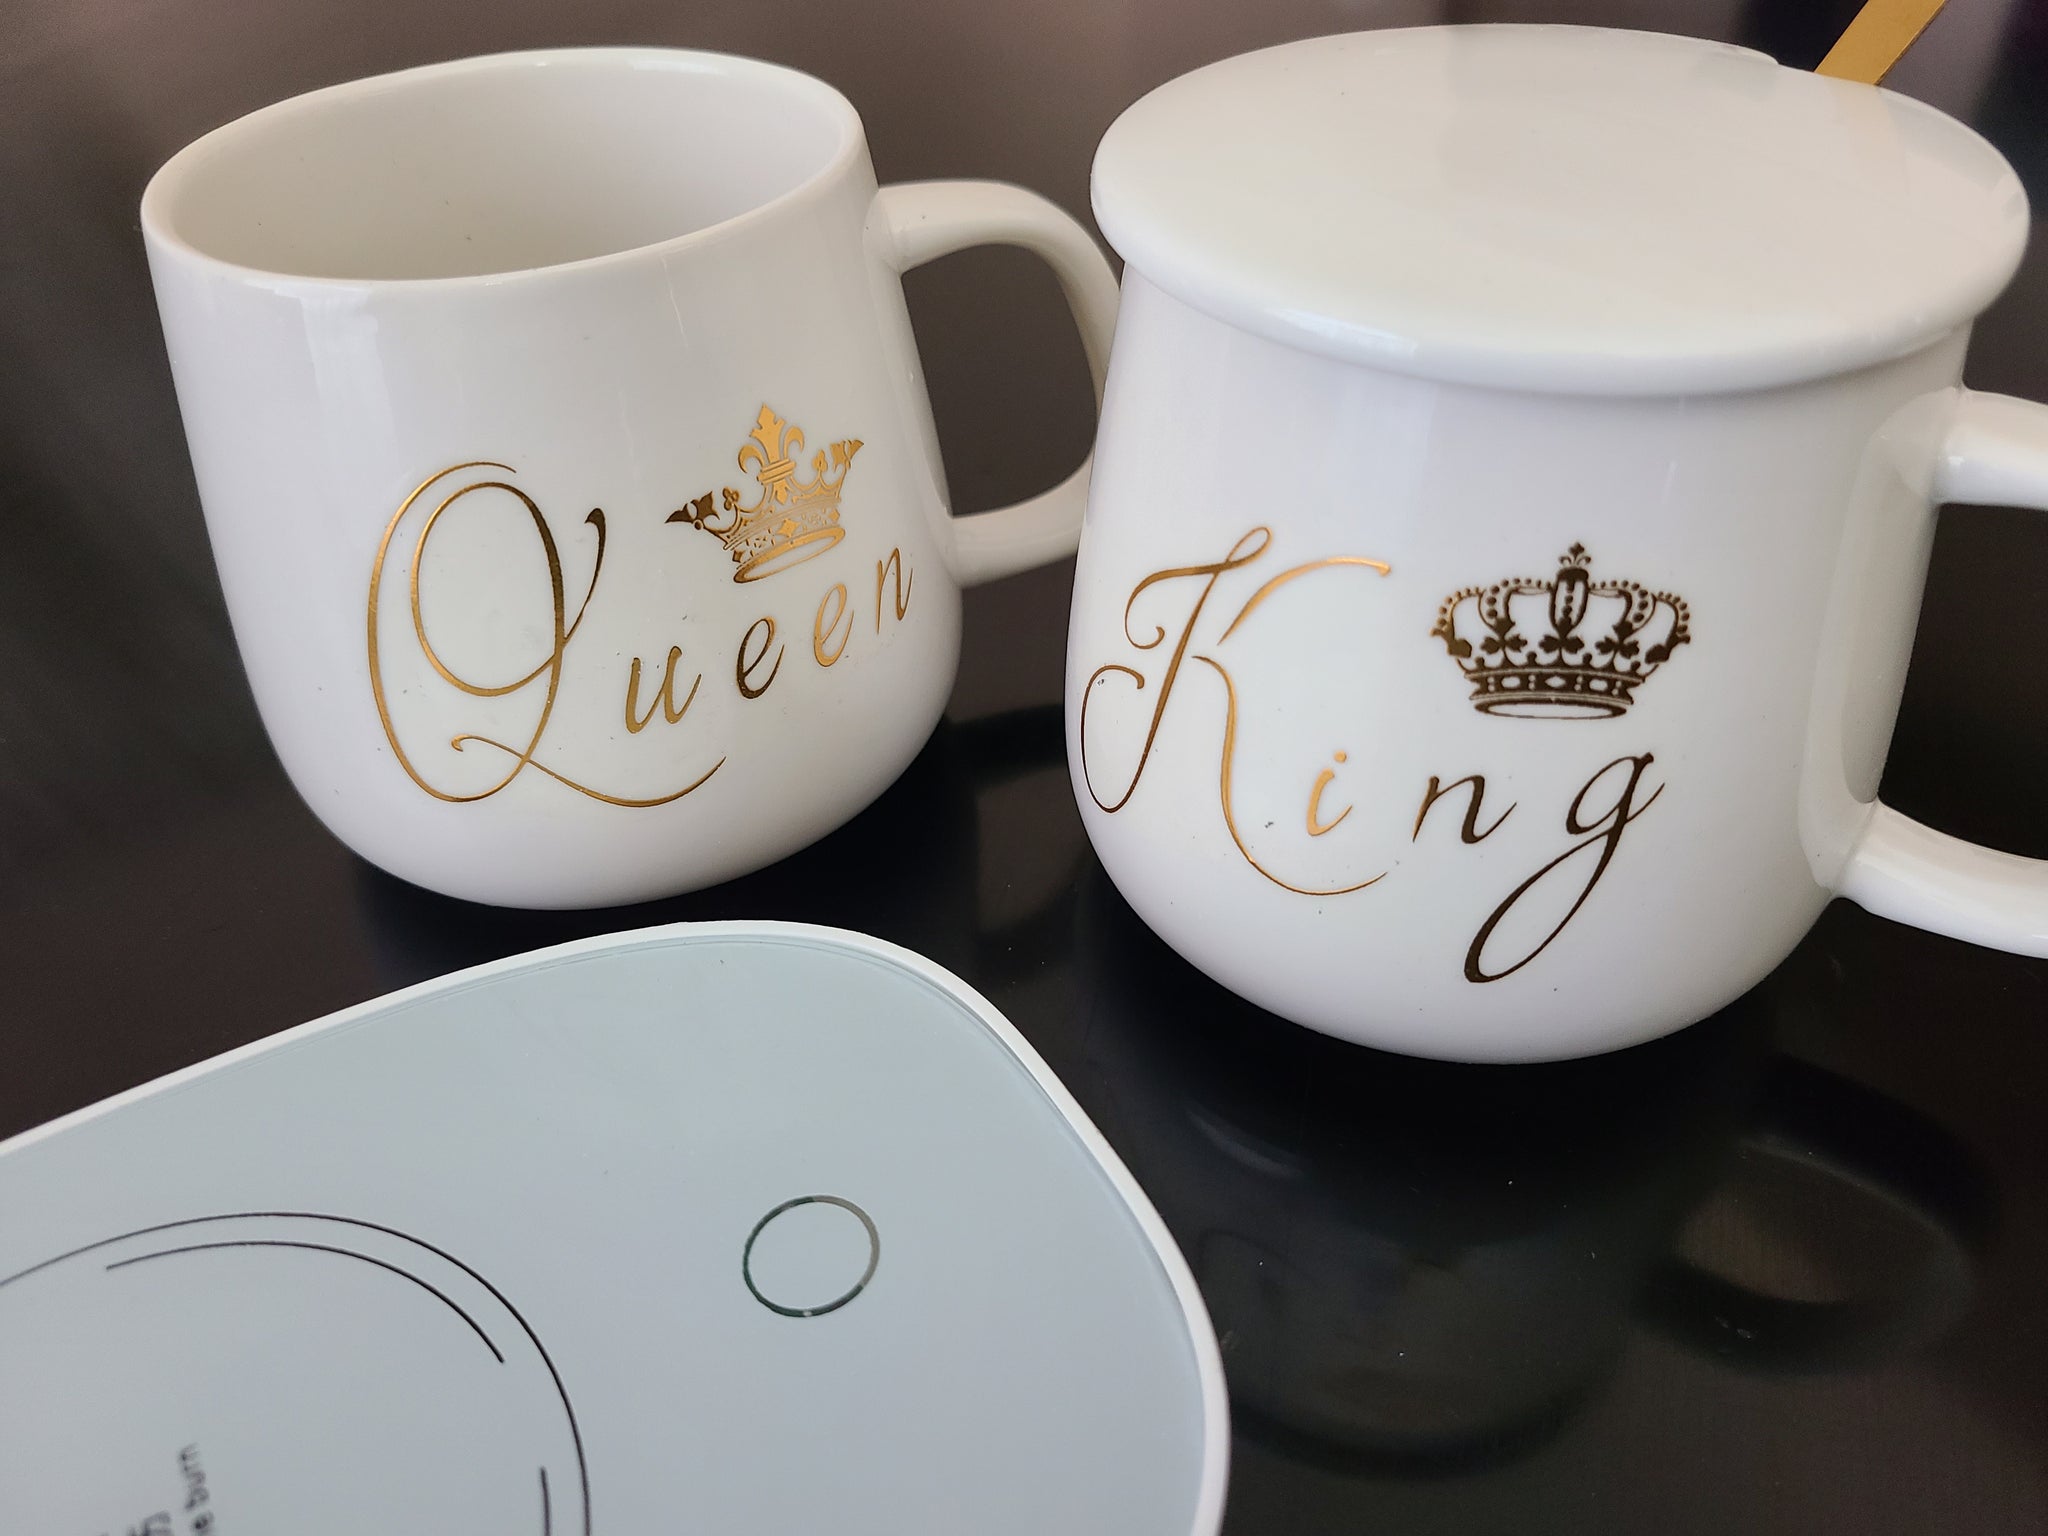 The queen of king coffee